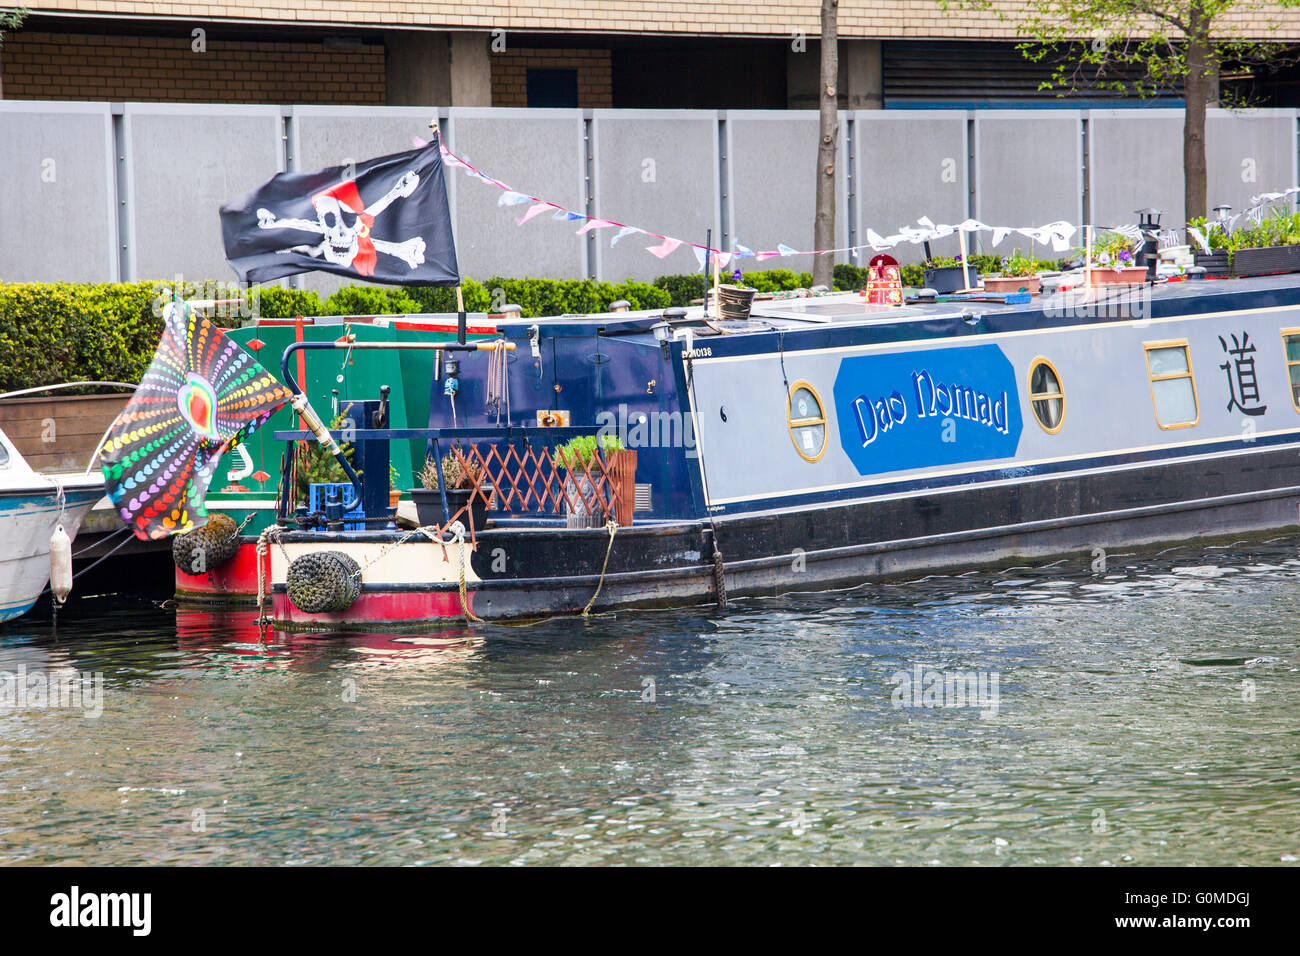 Narrowboat with Pirate flag Stock Photo